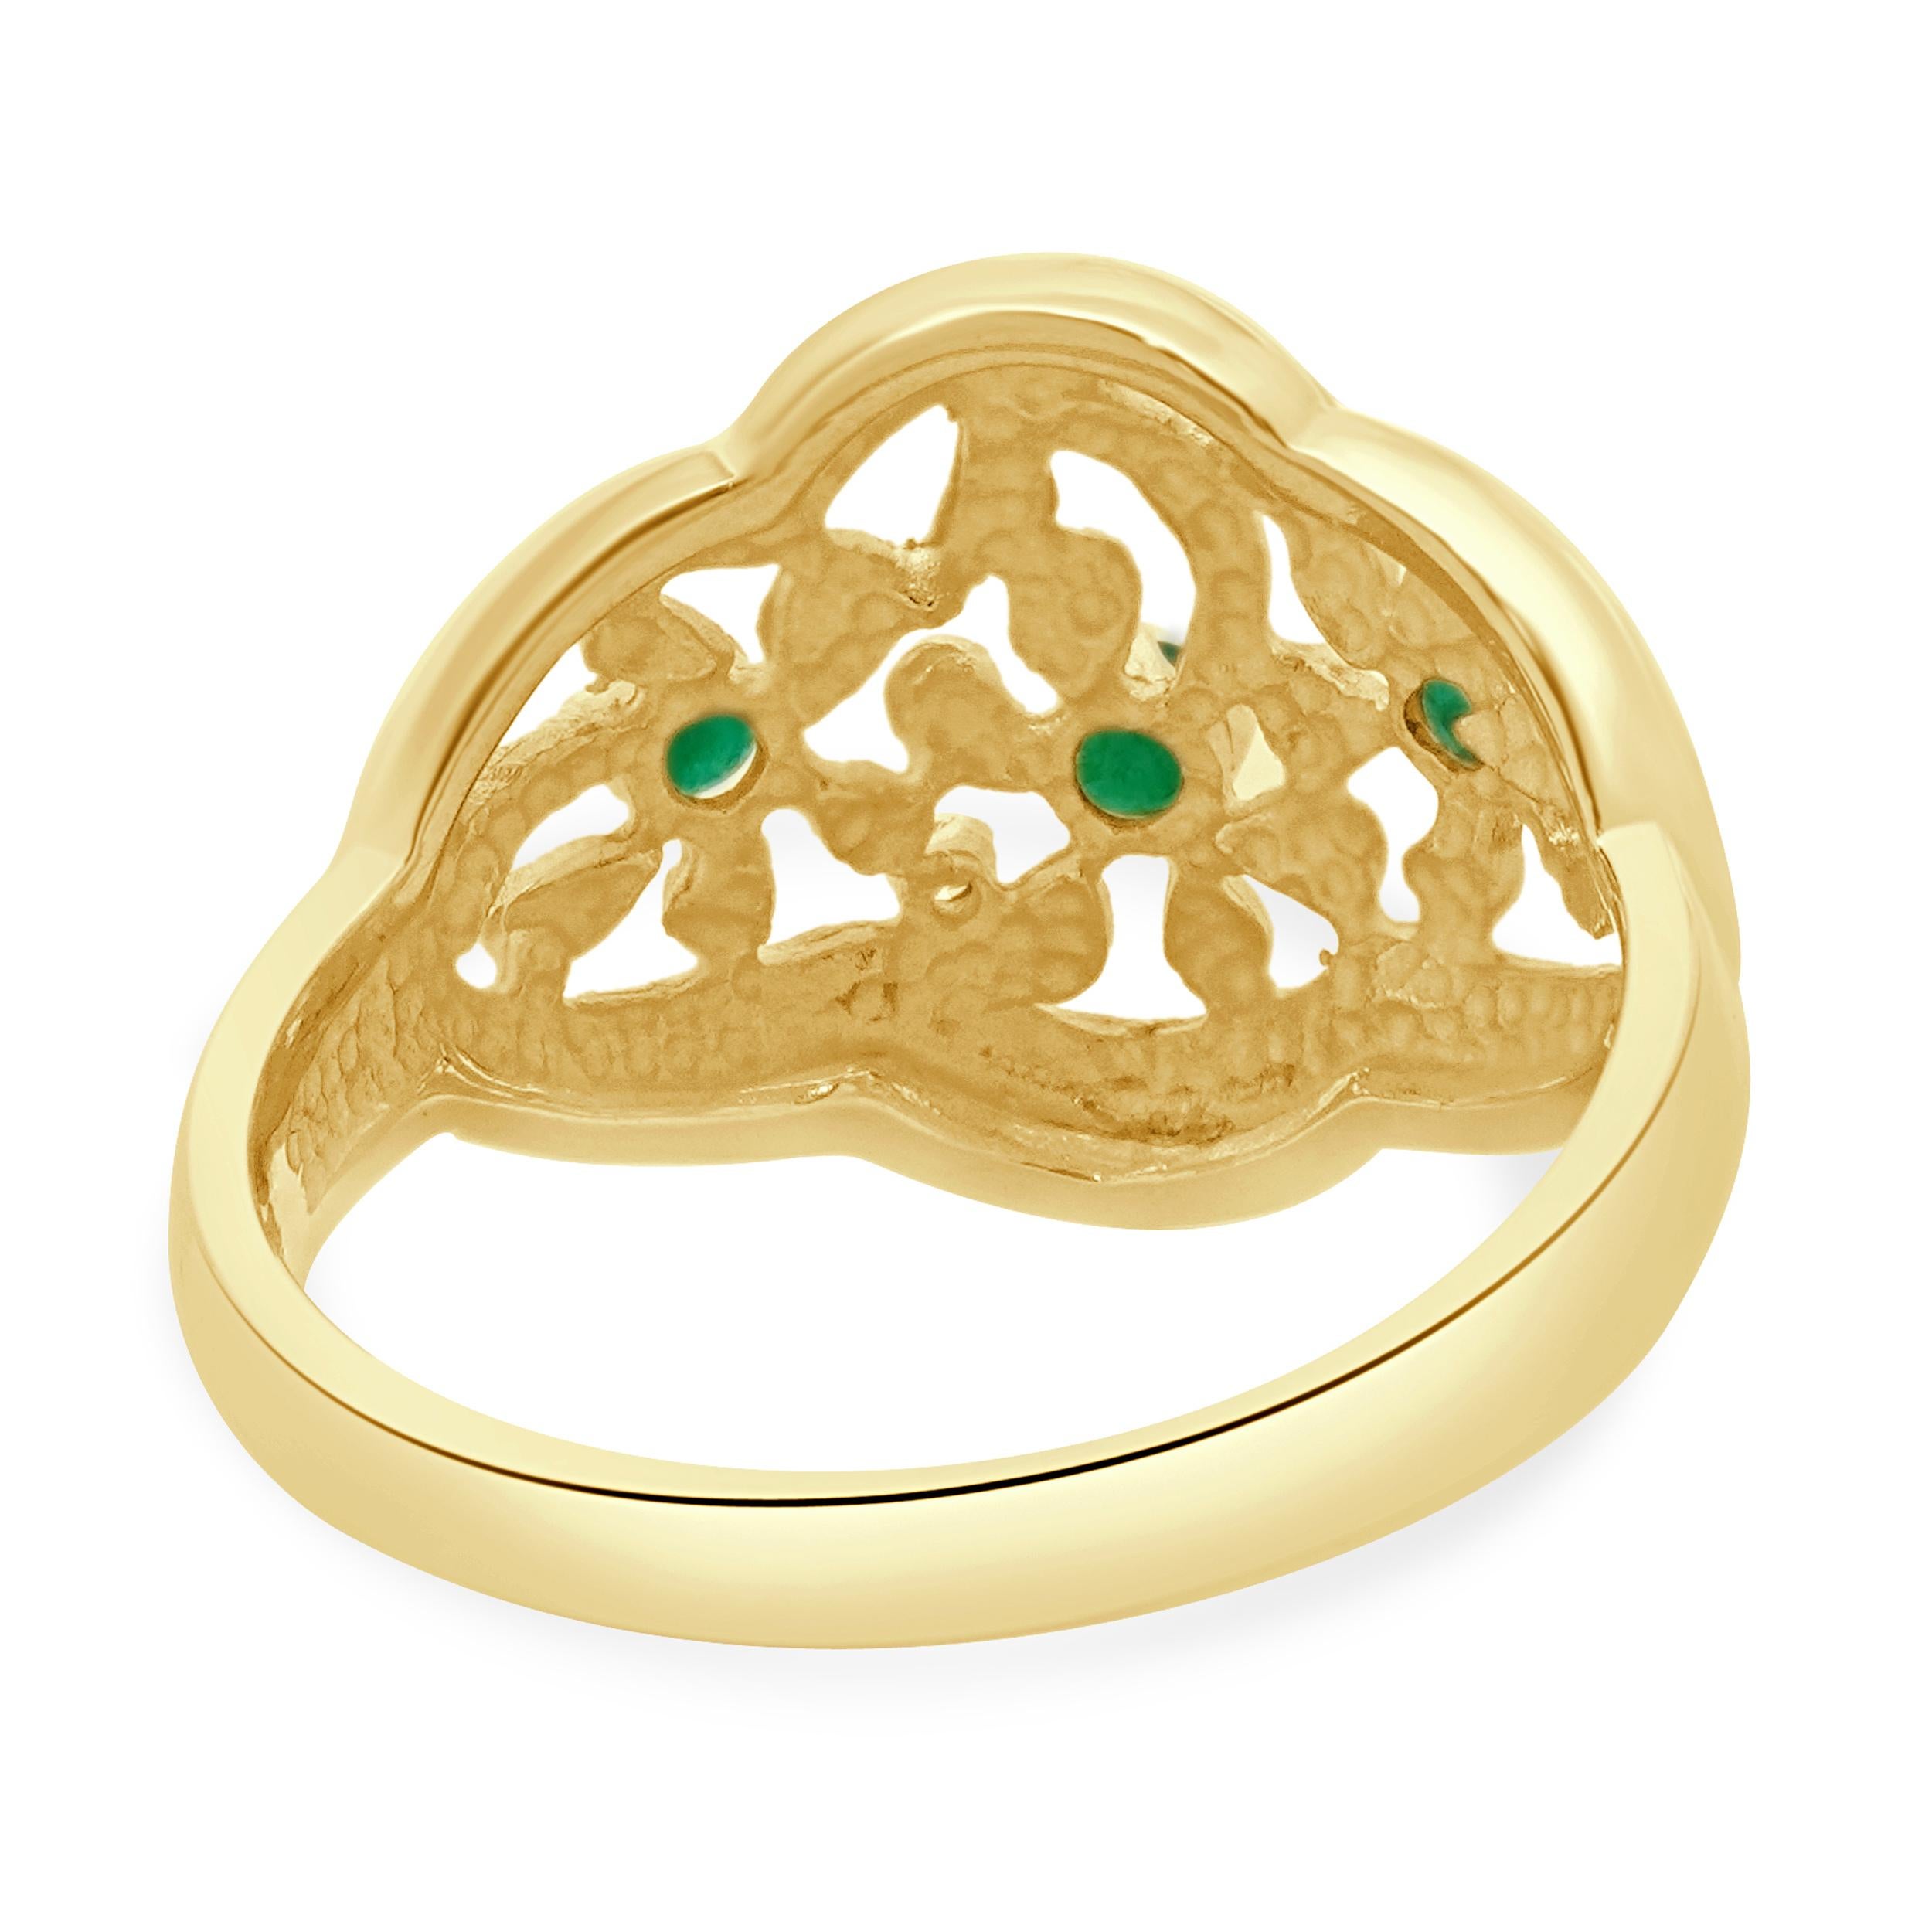 10 Karat Yellow Gold Vintage Emerald and Diamond Floral Cutout Ring In Excellent Condition For Sale In Scottsdale, AZ